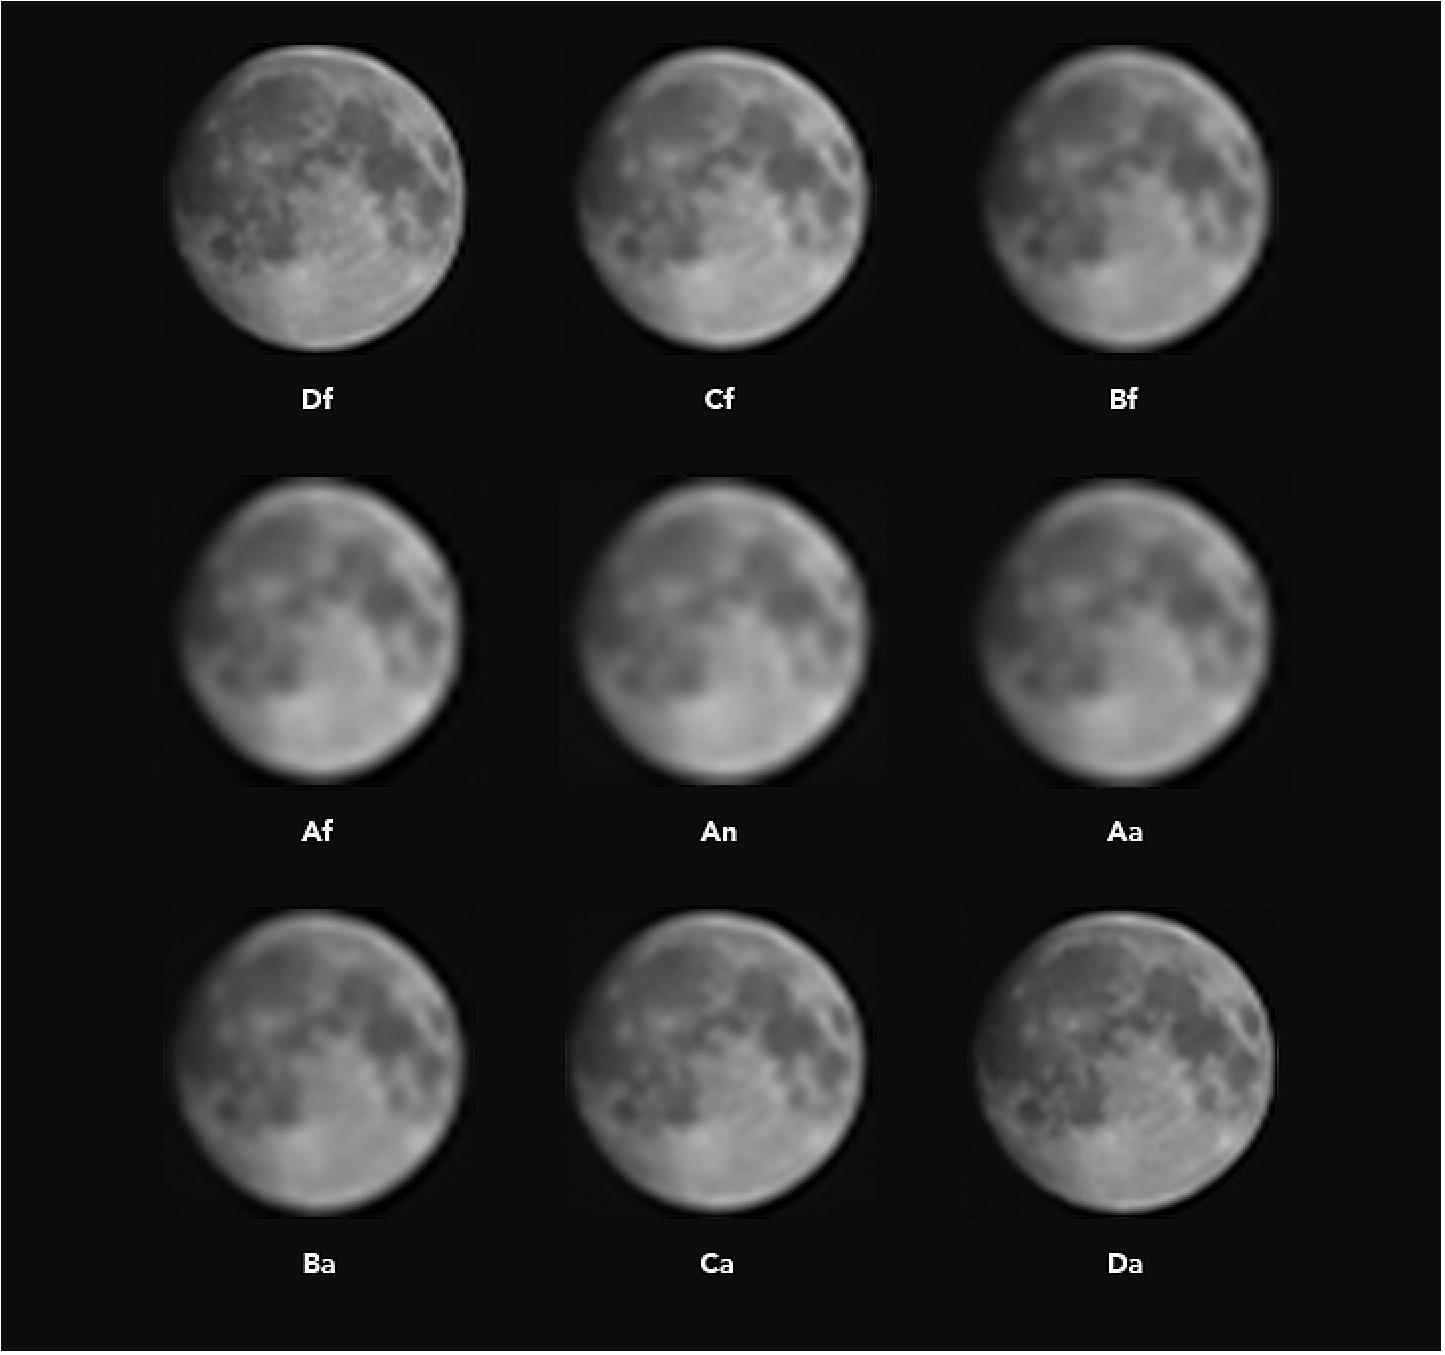 Figure 65: MISR images of the moon acquired on August 6, 2017 (image credit: NASA, images by Michael Abrams, Abbey Nastan, and Jesse Allen; Story by Tassia Owen, Abbey Nastan, and Michael Carlowicz)